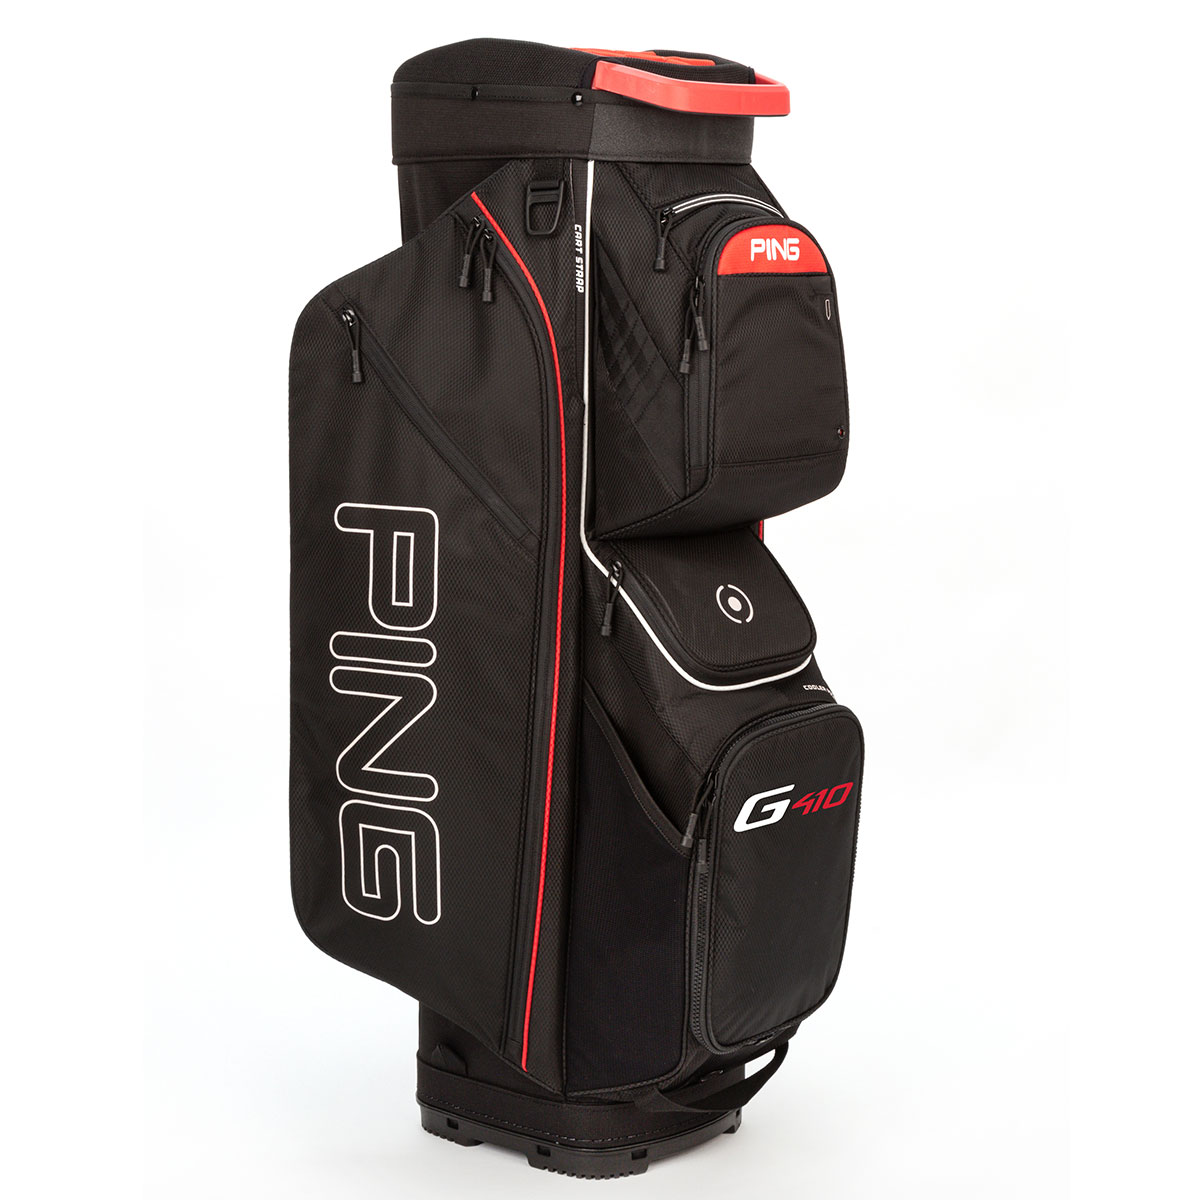 PING Traverse G410 Cart Bag from american golf